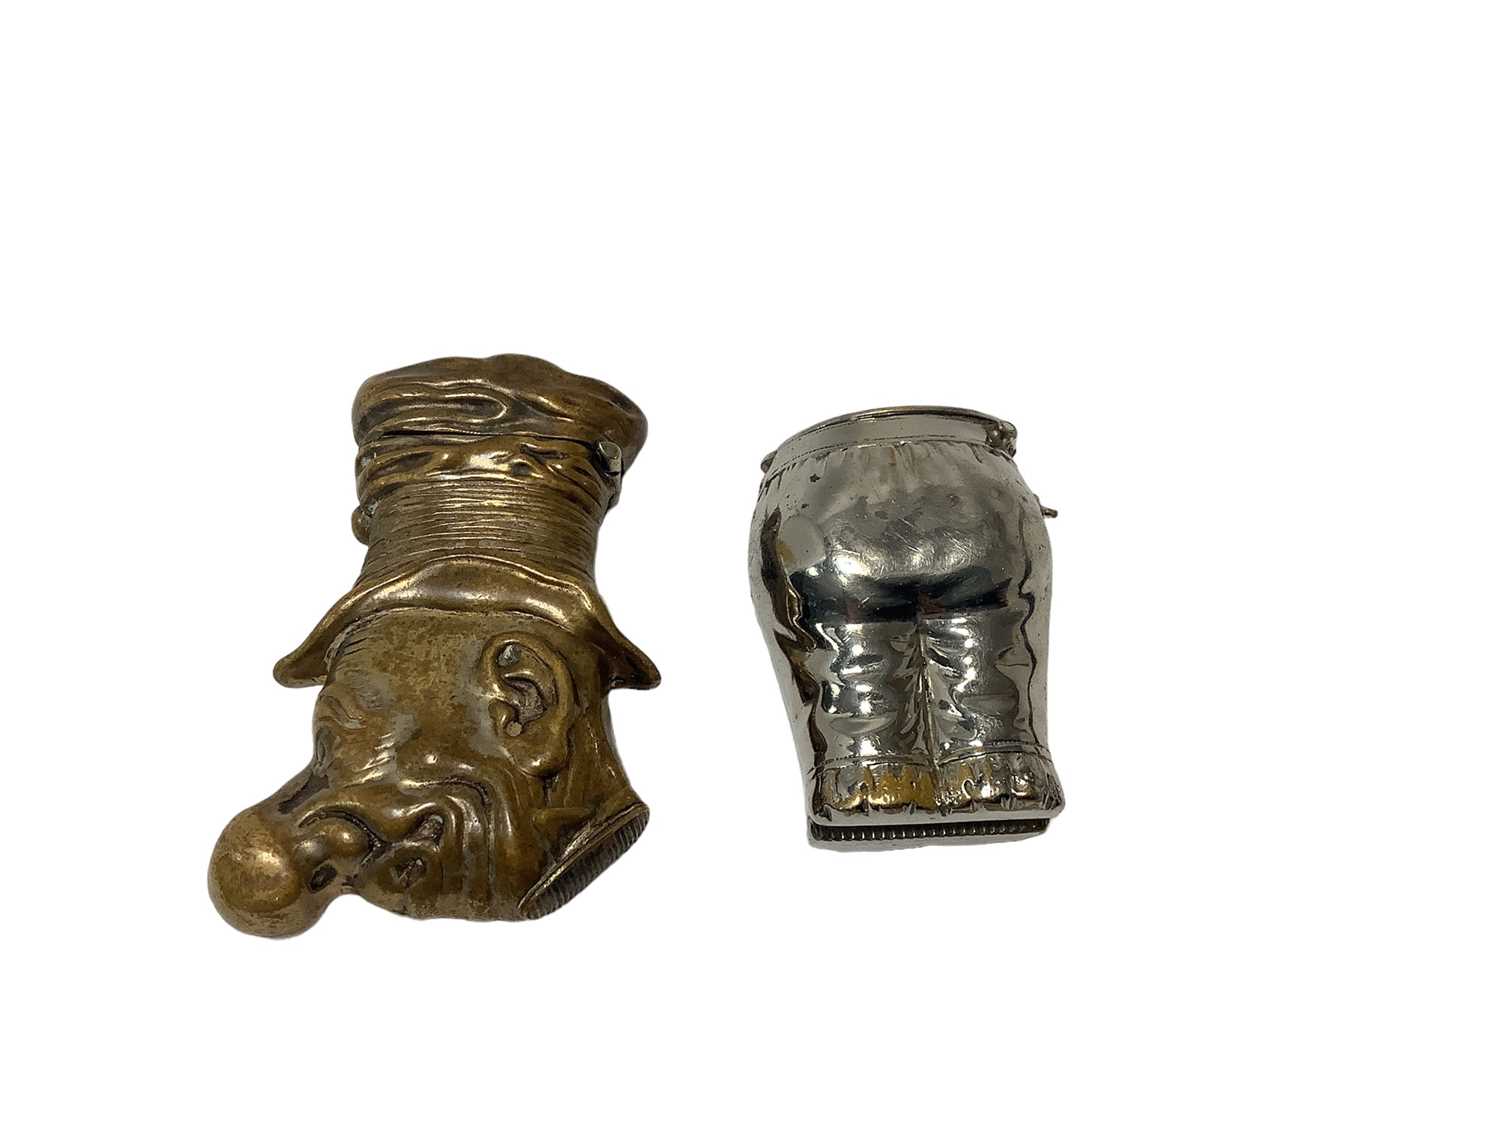 Lot 8 - Victorian brass novelty Vesta case in the form of Ally Sloper (an inebriated man in top hat )60mm and another plated example in the form a pair of knickers 41mm (2)